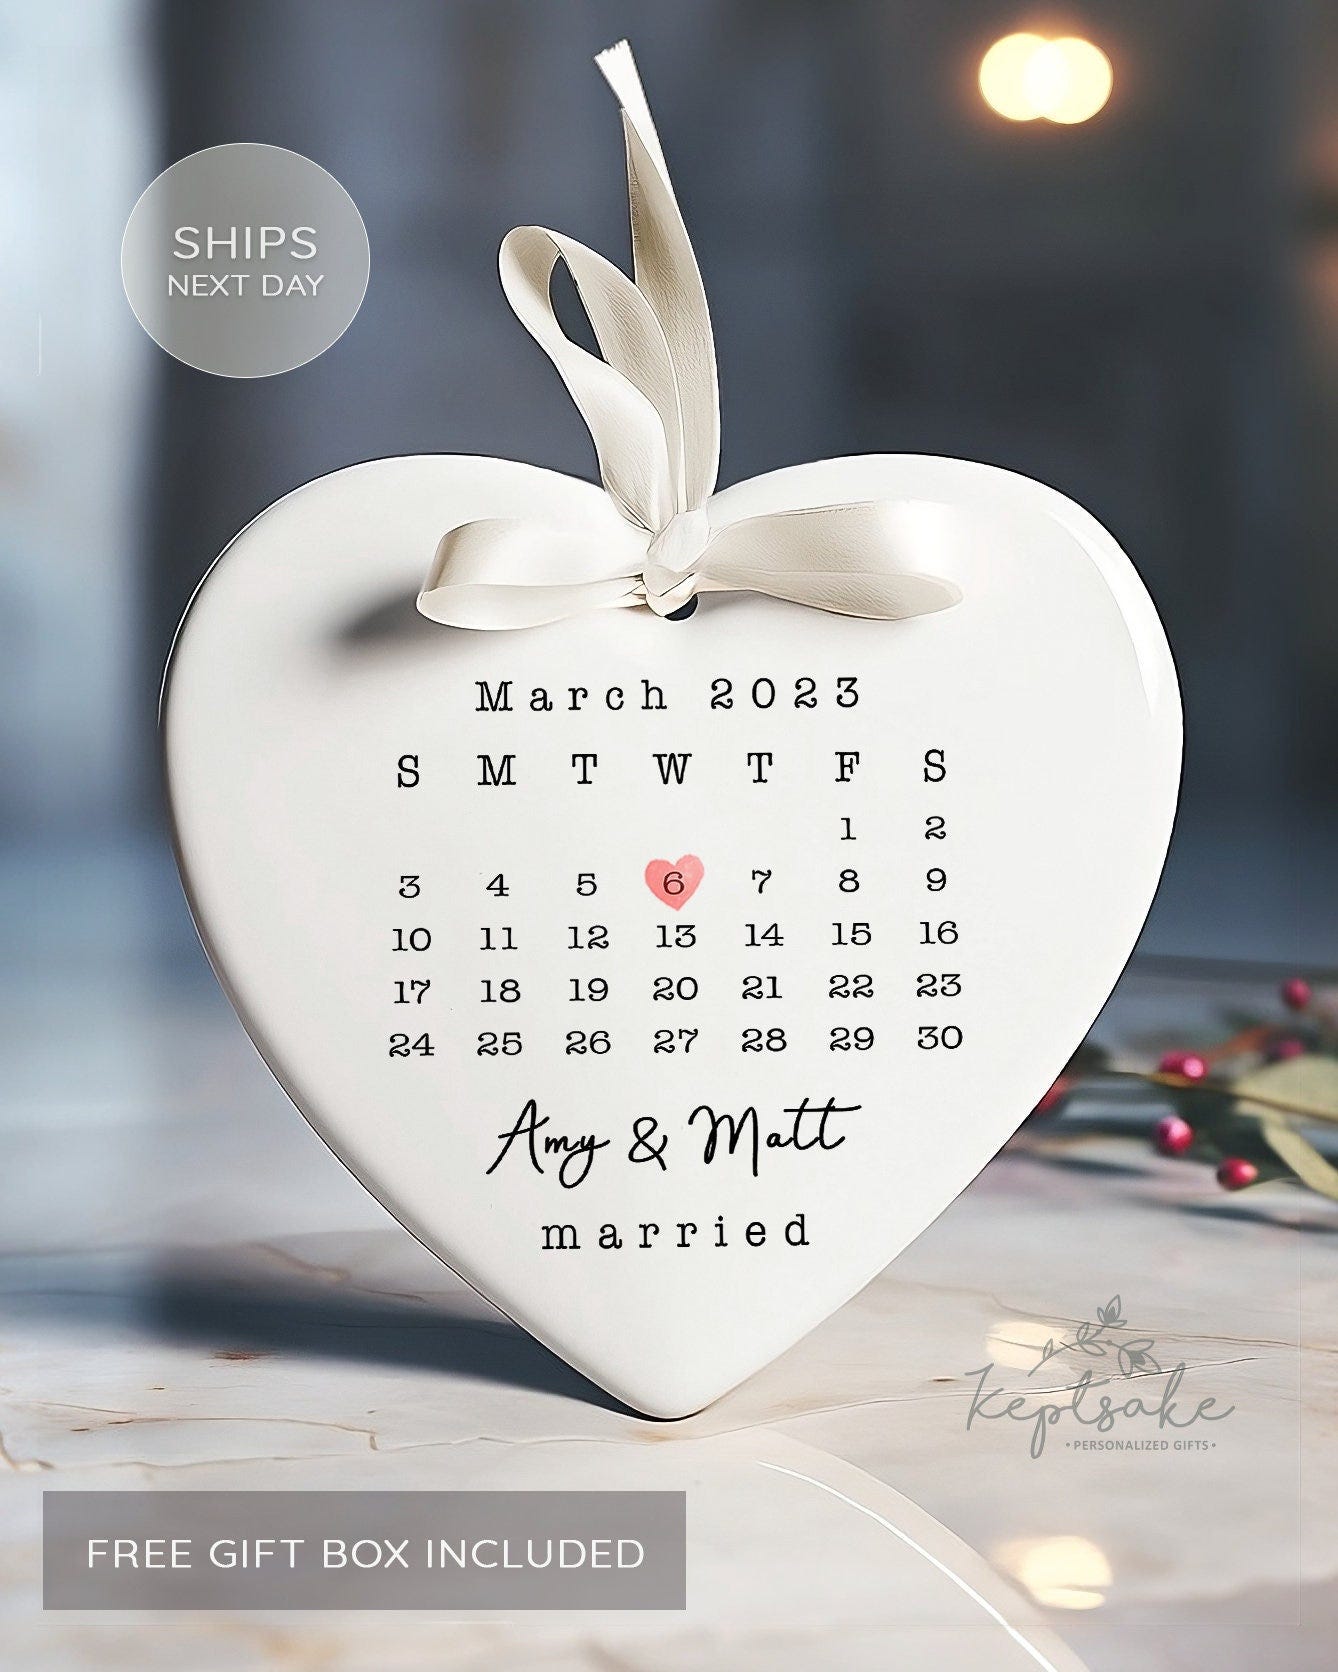 Married Ornament, Wedding Gift, Wedding Date ornament, Heart Calendar, Anniversary Gift, Our First Christmas, Newlywed Gift, Wedding Gift